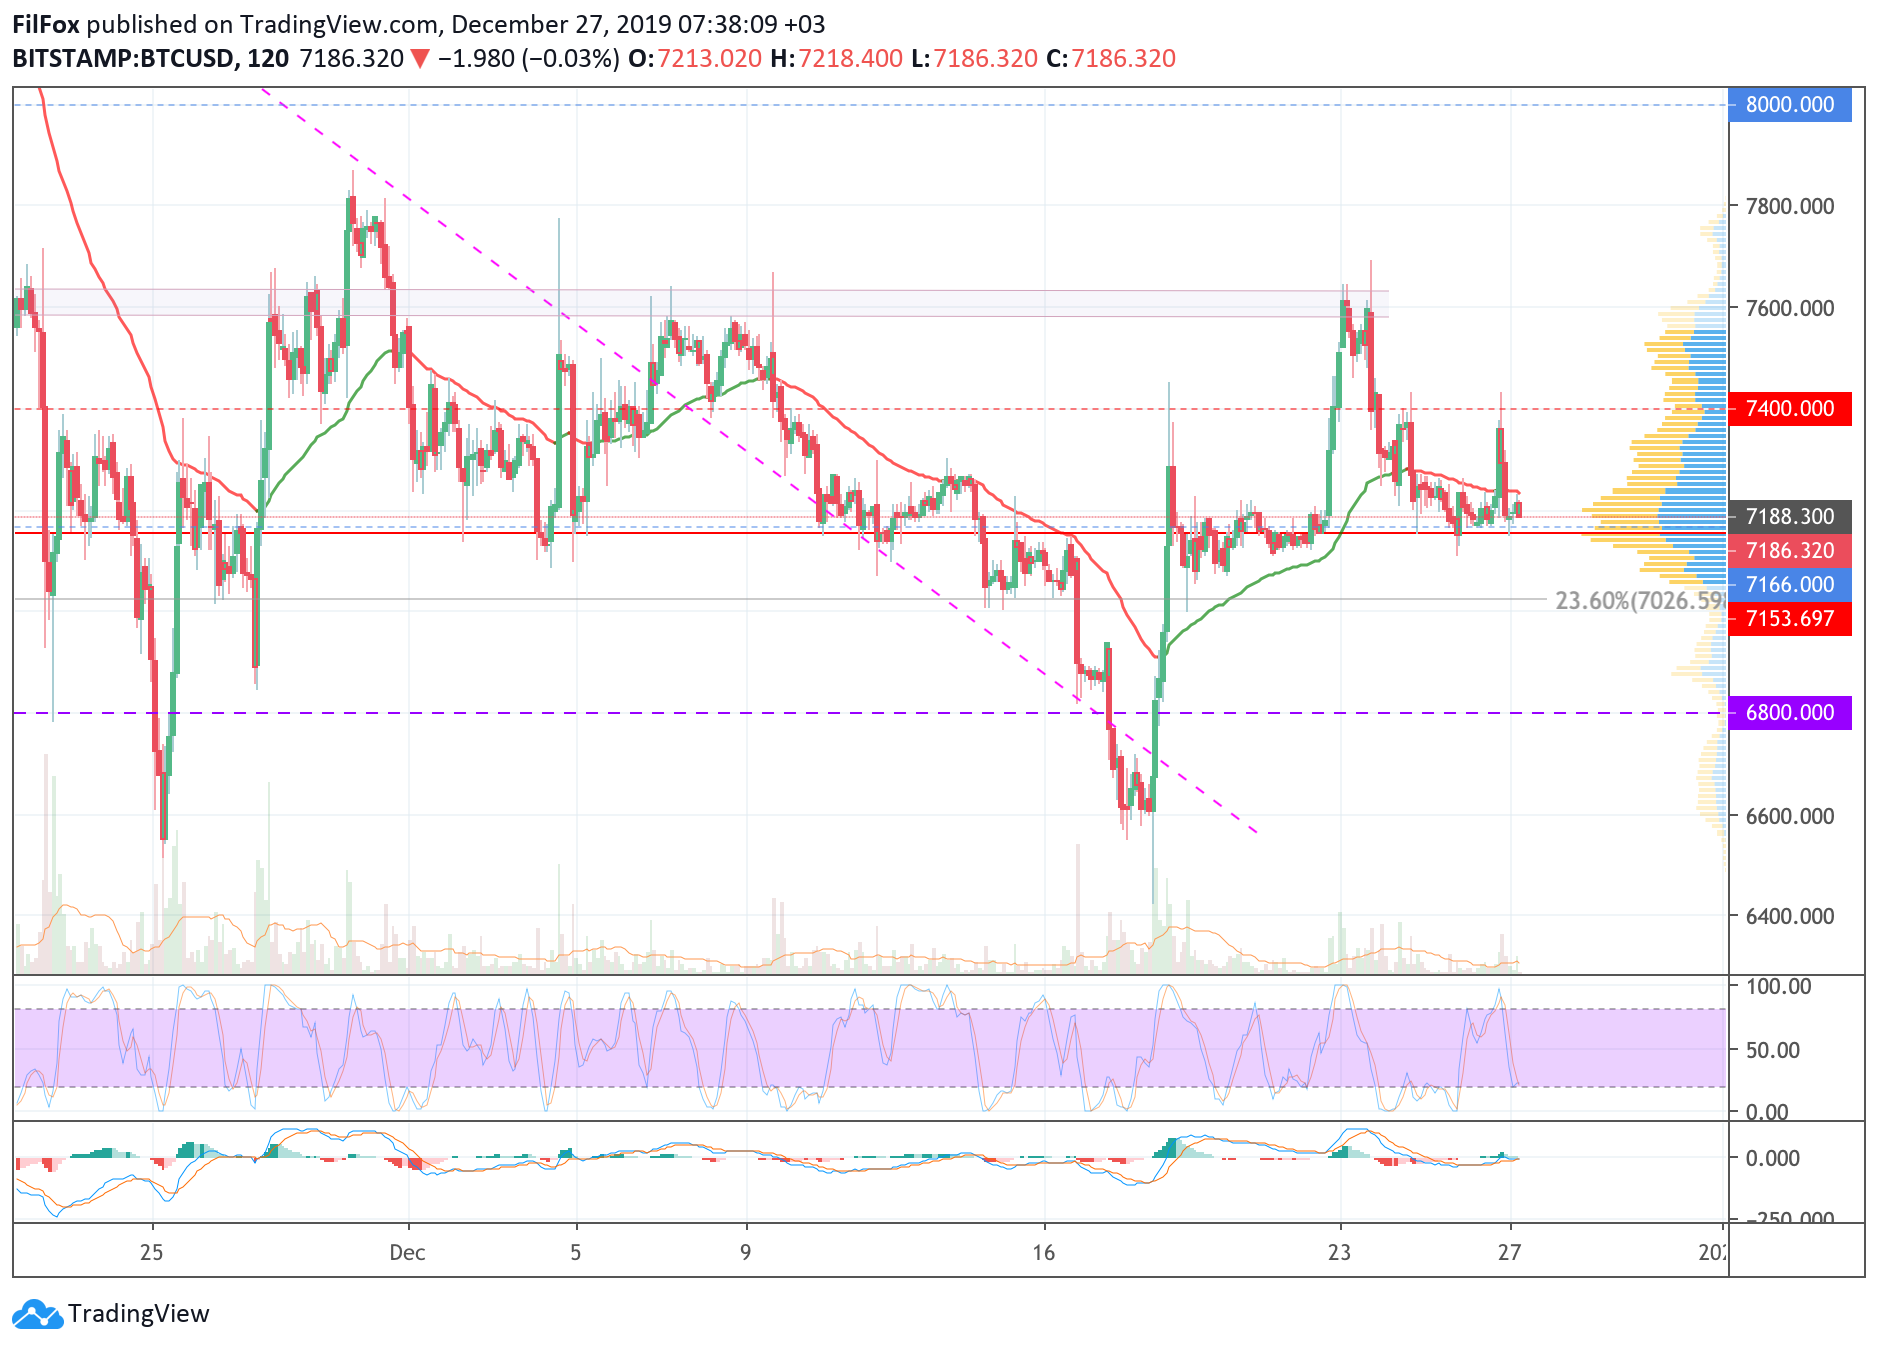 Analysis of cryptocurrency pairs BTC / USD, ETH / USD and XRP / USD on 12/27/2019